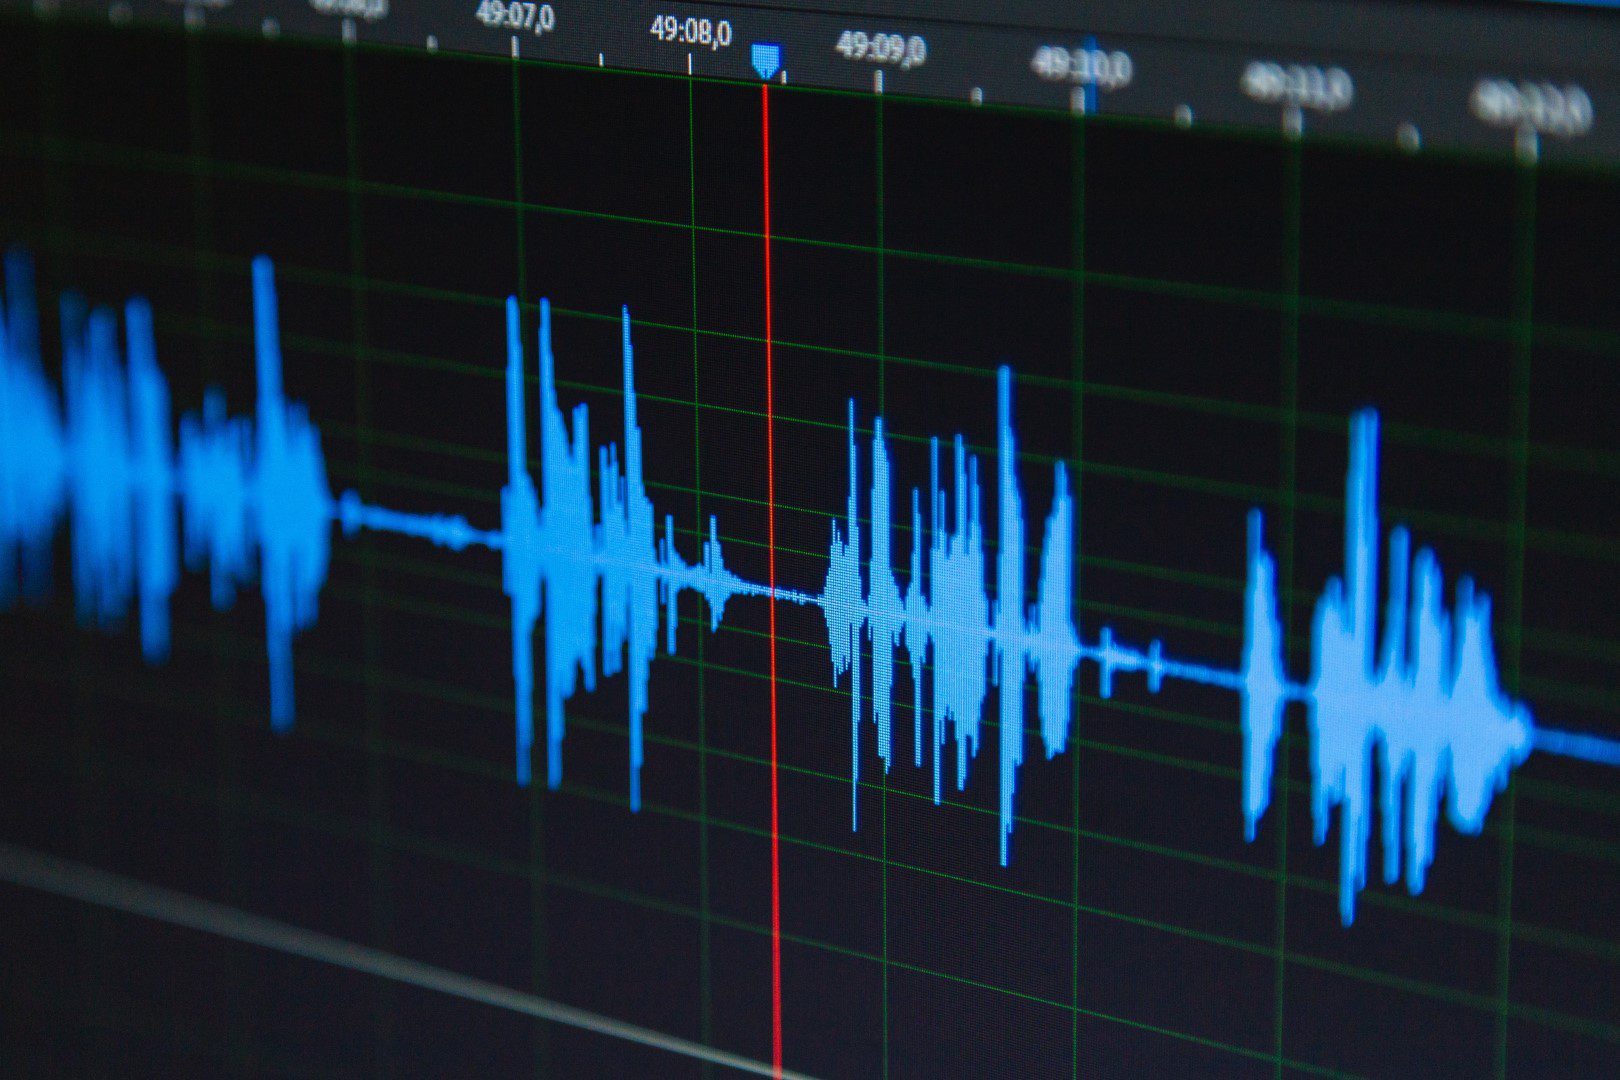 What can the audio recorder do in Windows 11?